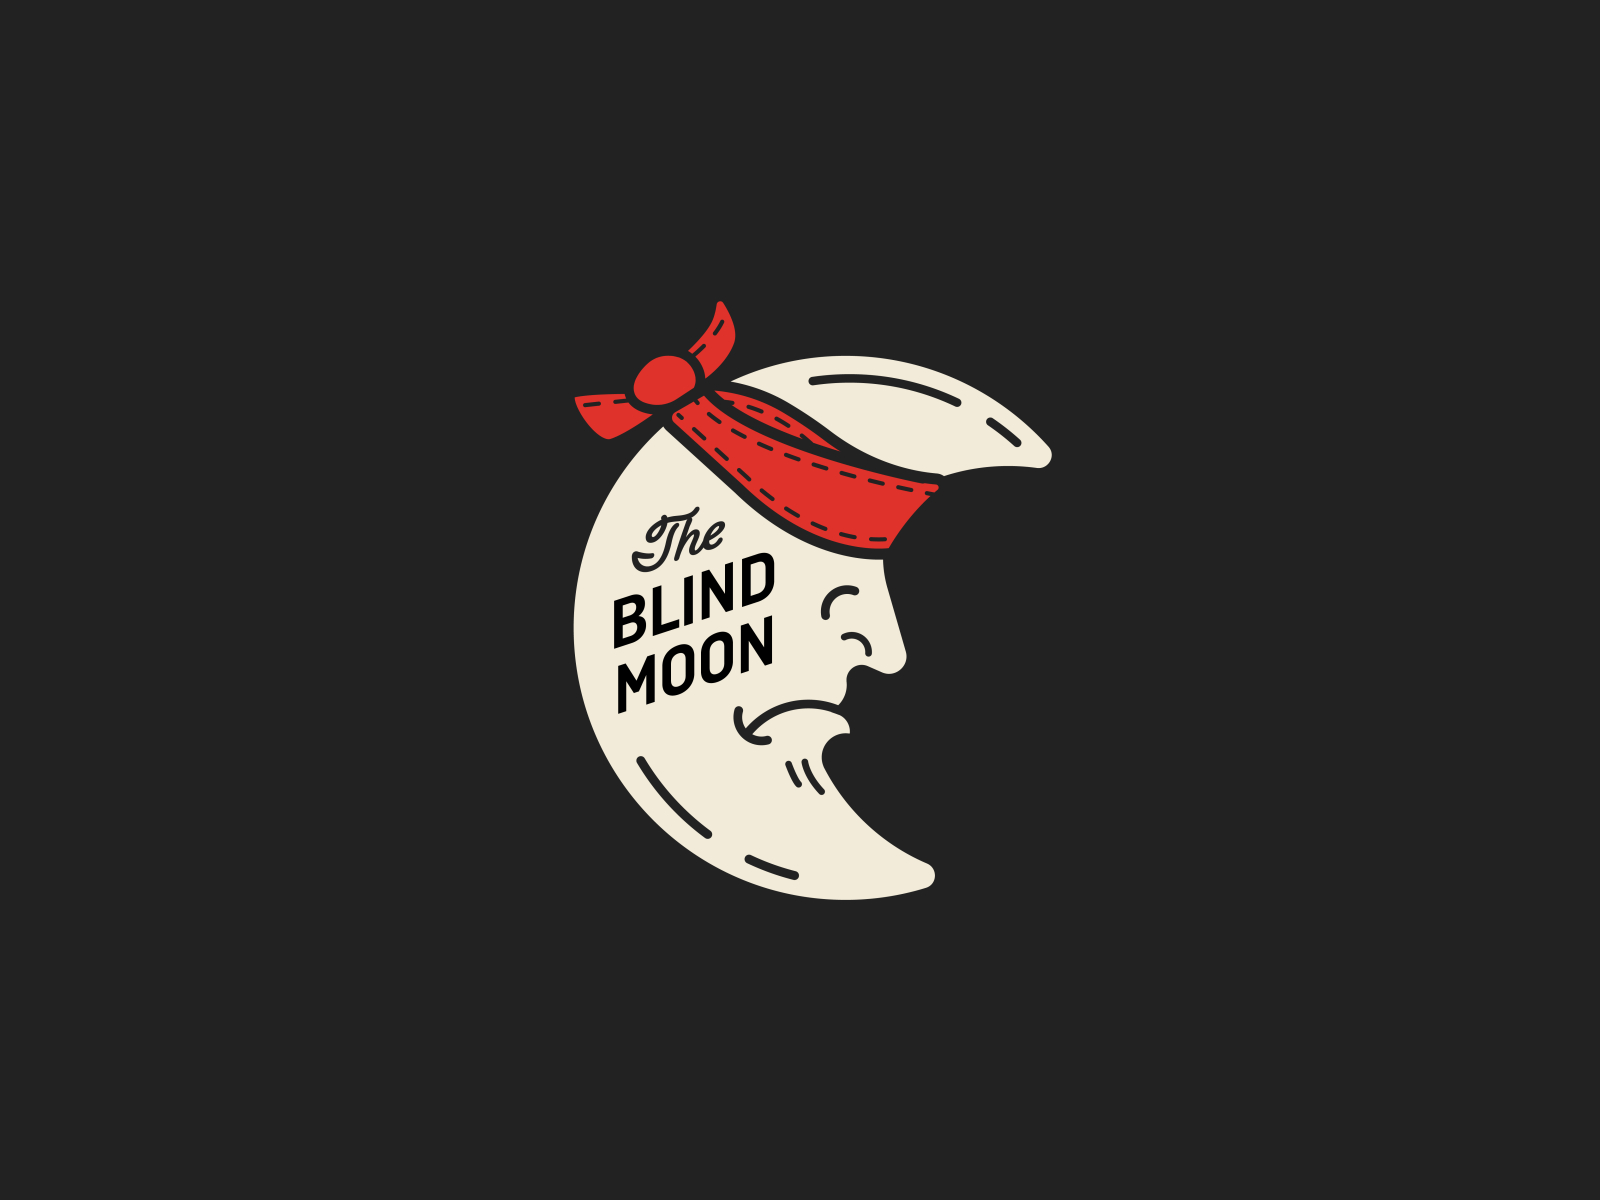 Blind Moon by Jim Kennelly on Dribbble